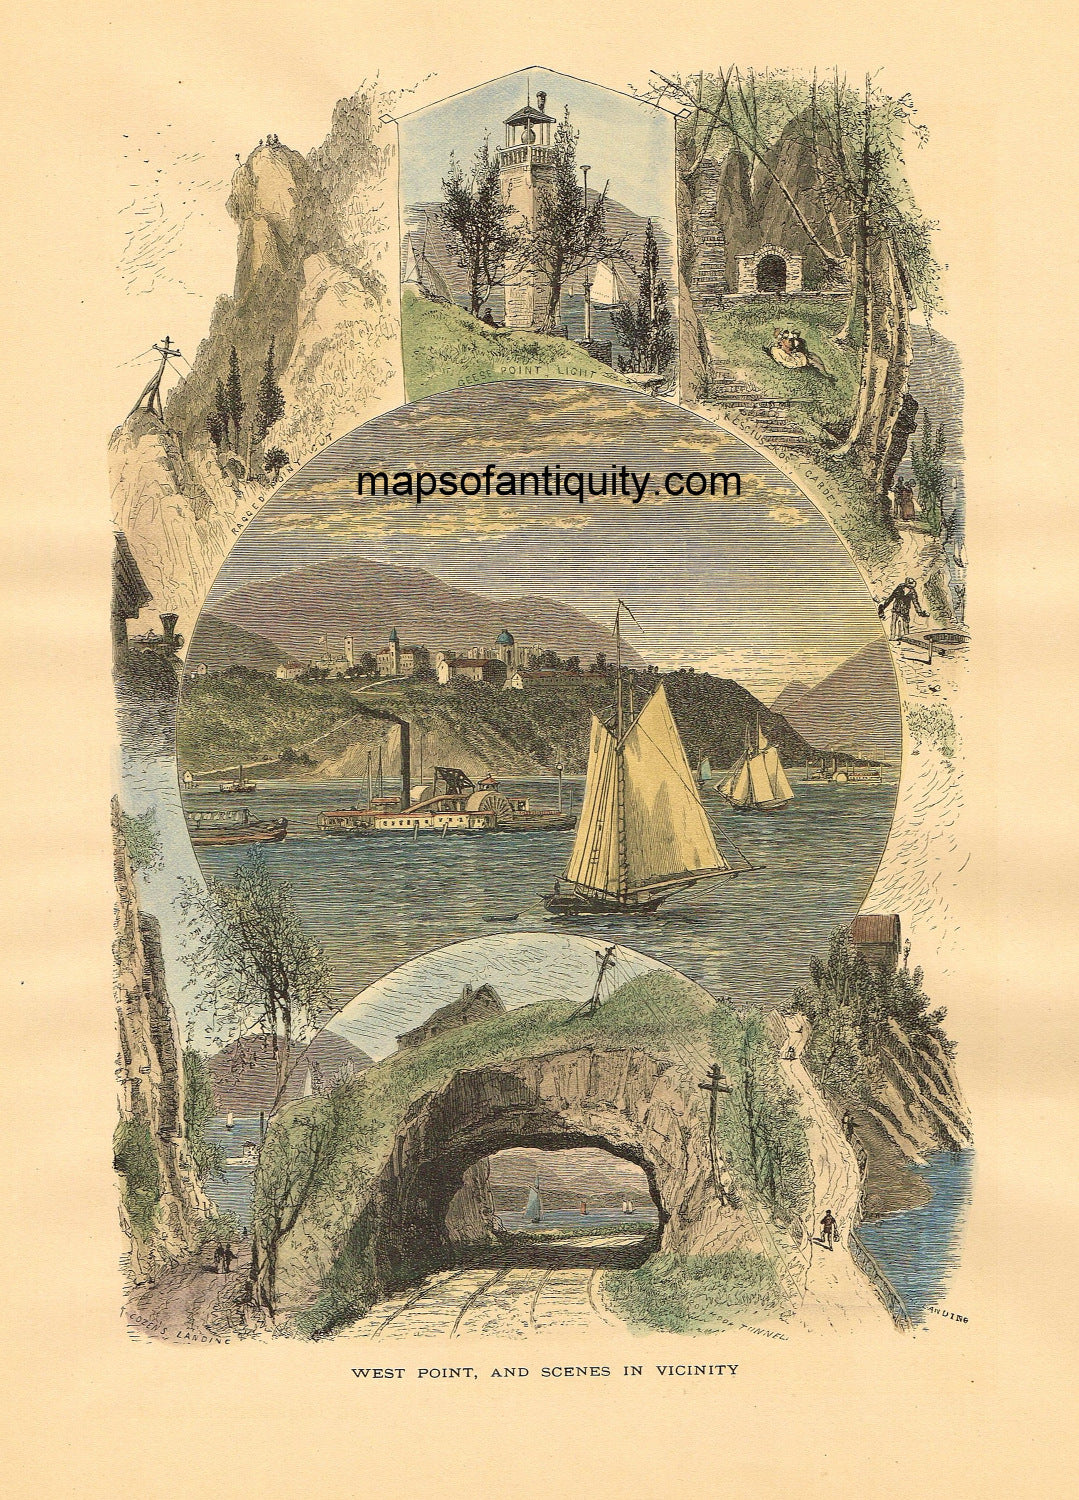 Hand-Colored-Antique-Engraving-West-Point-and-Scenes-in-Vicinity-New-York--1872-Picturesque-America-Maps-Of-Antiquity